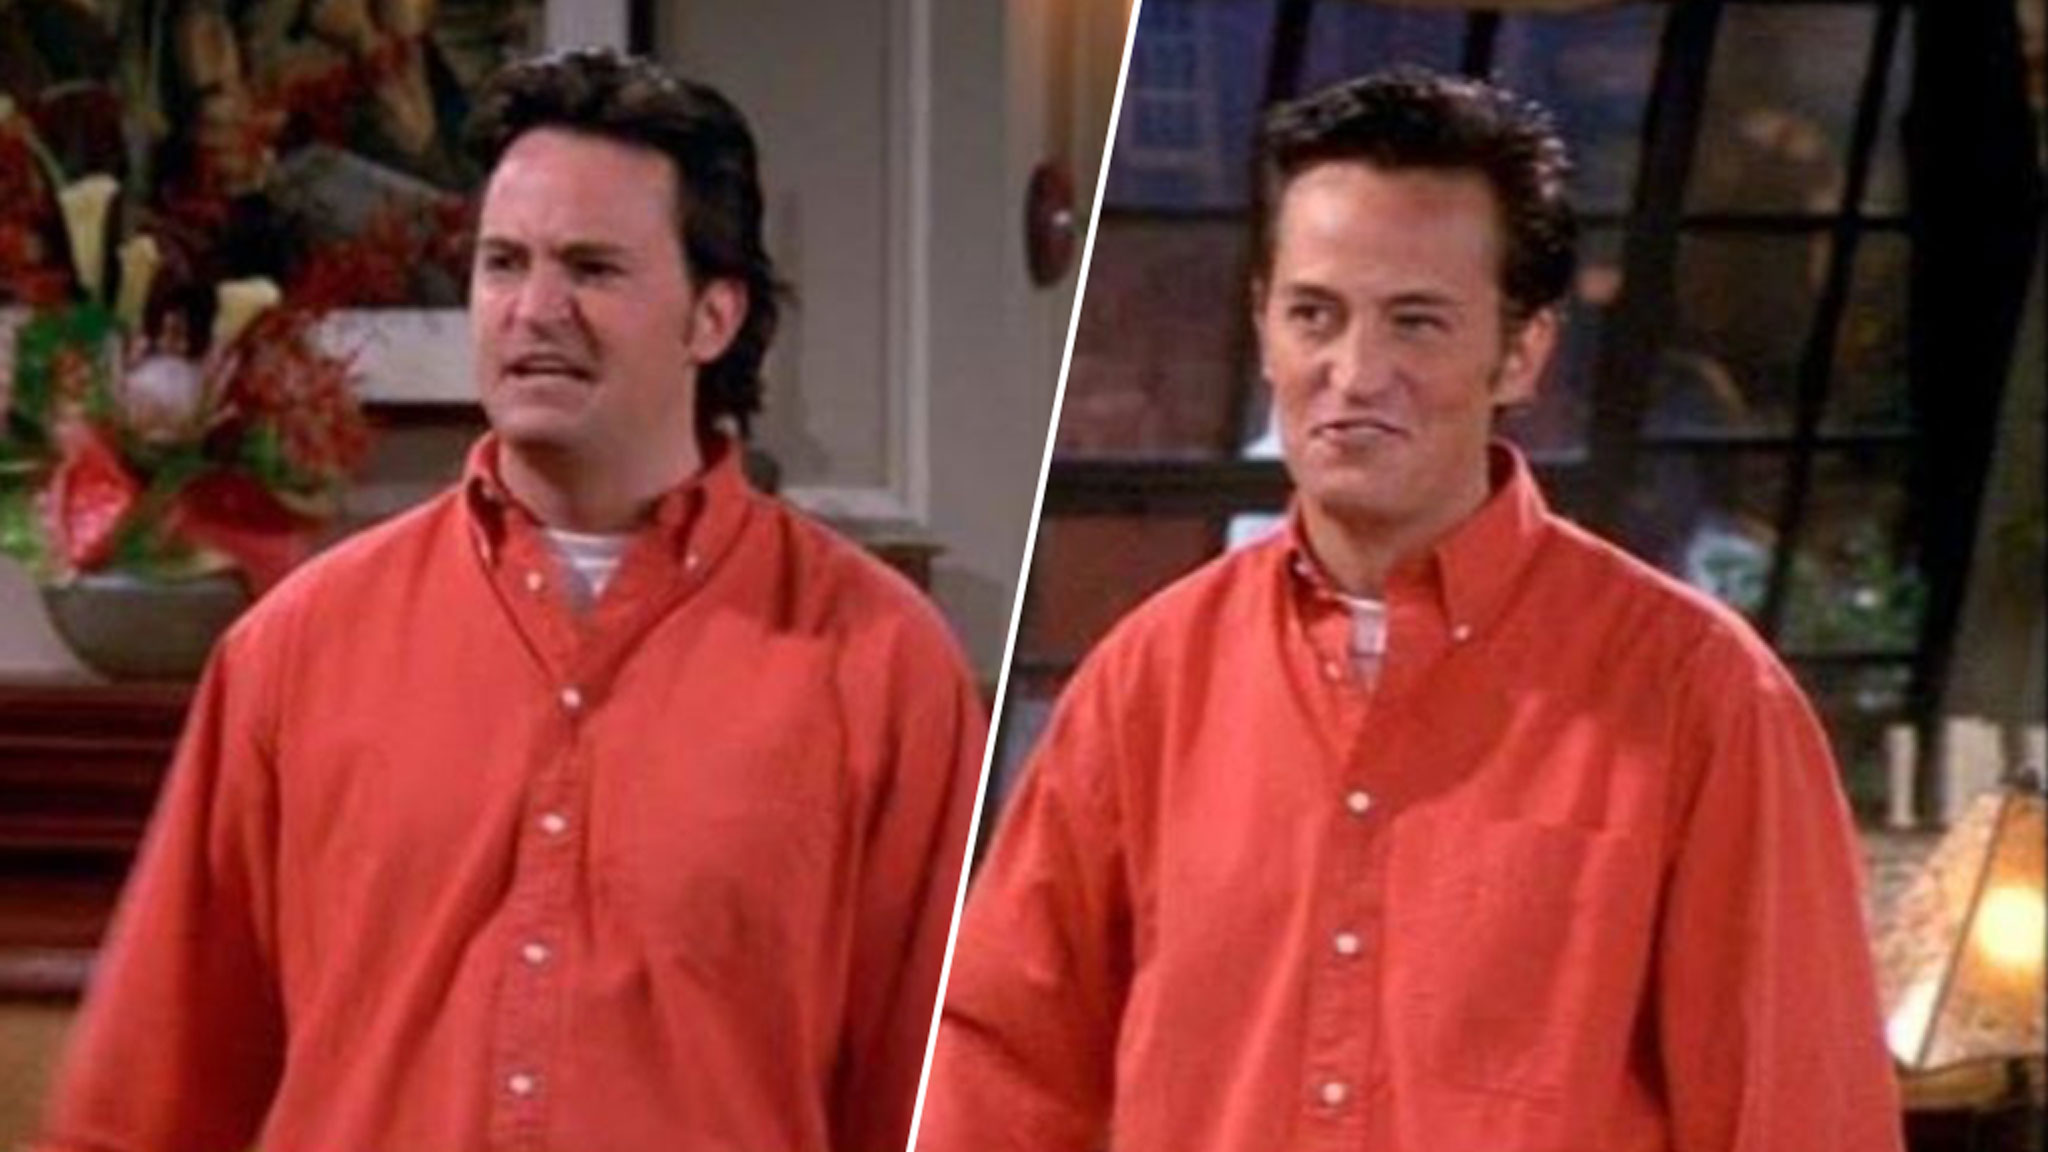 Why did Chandler lose weight in season 3?